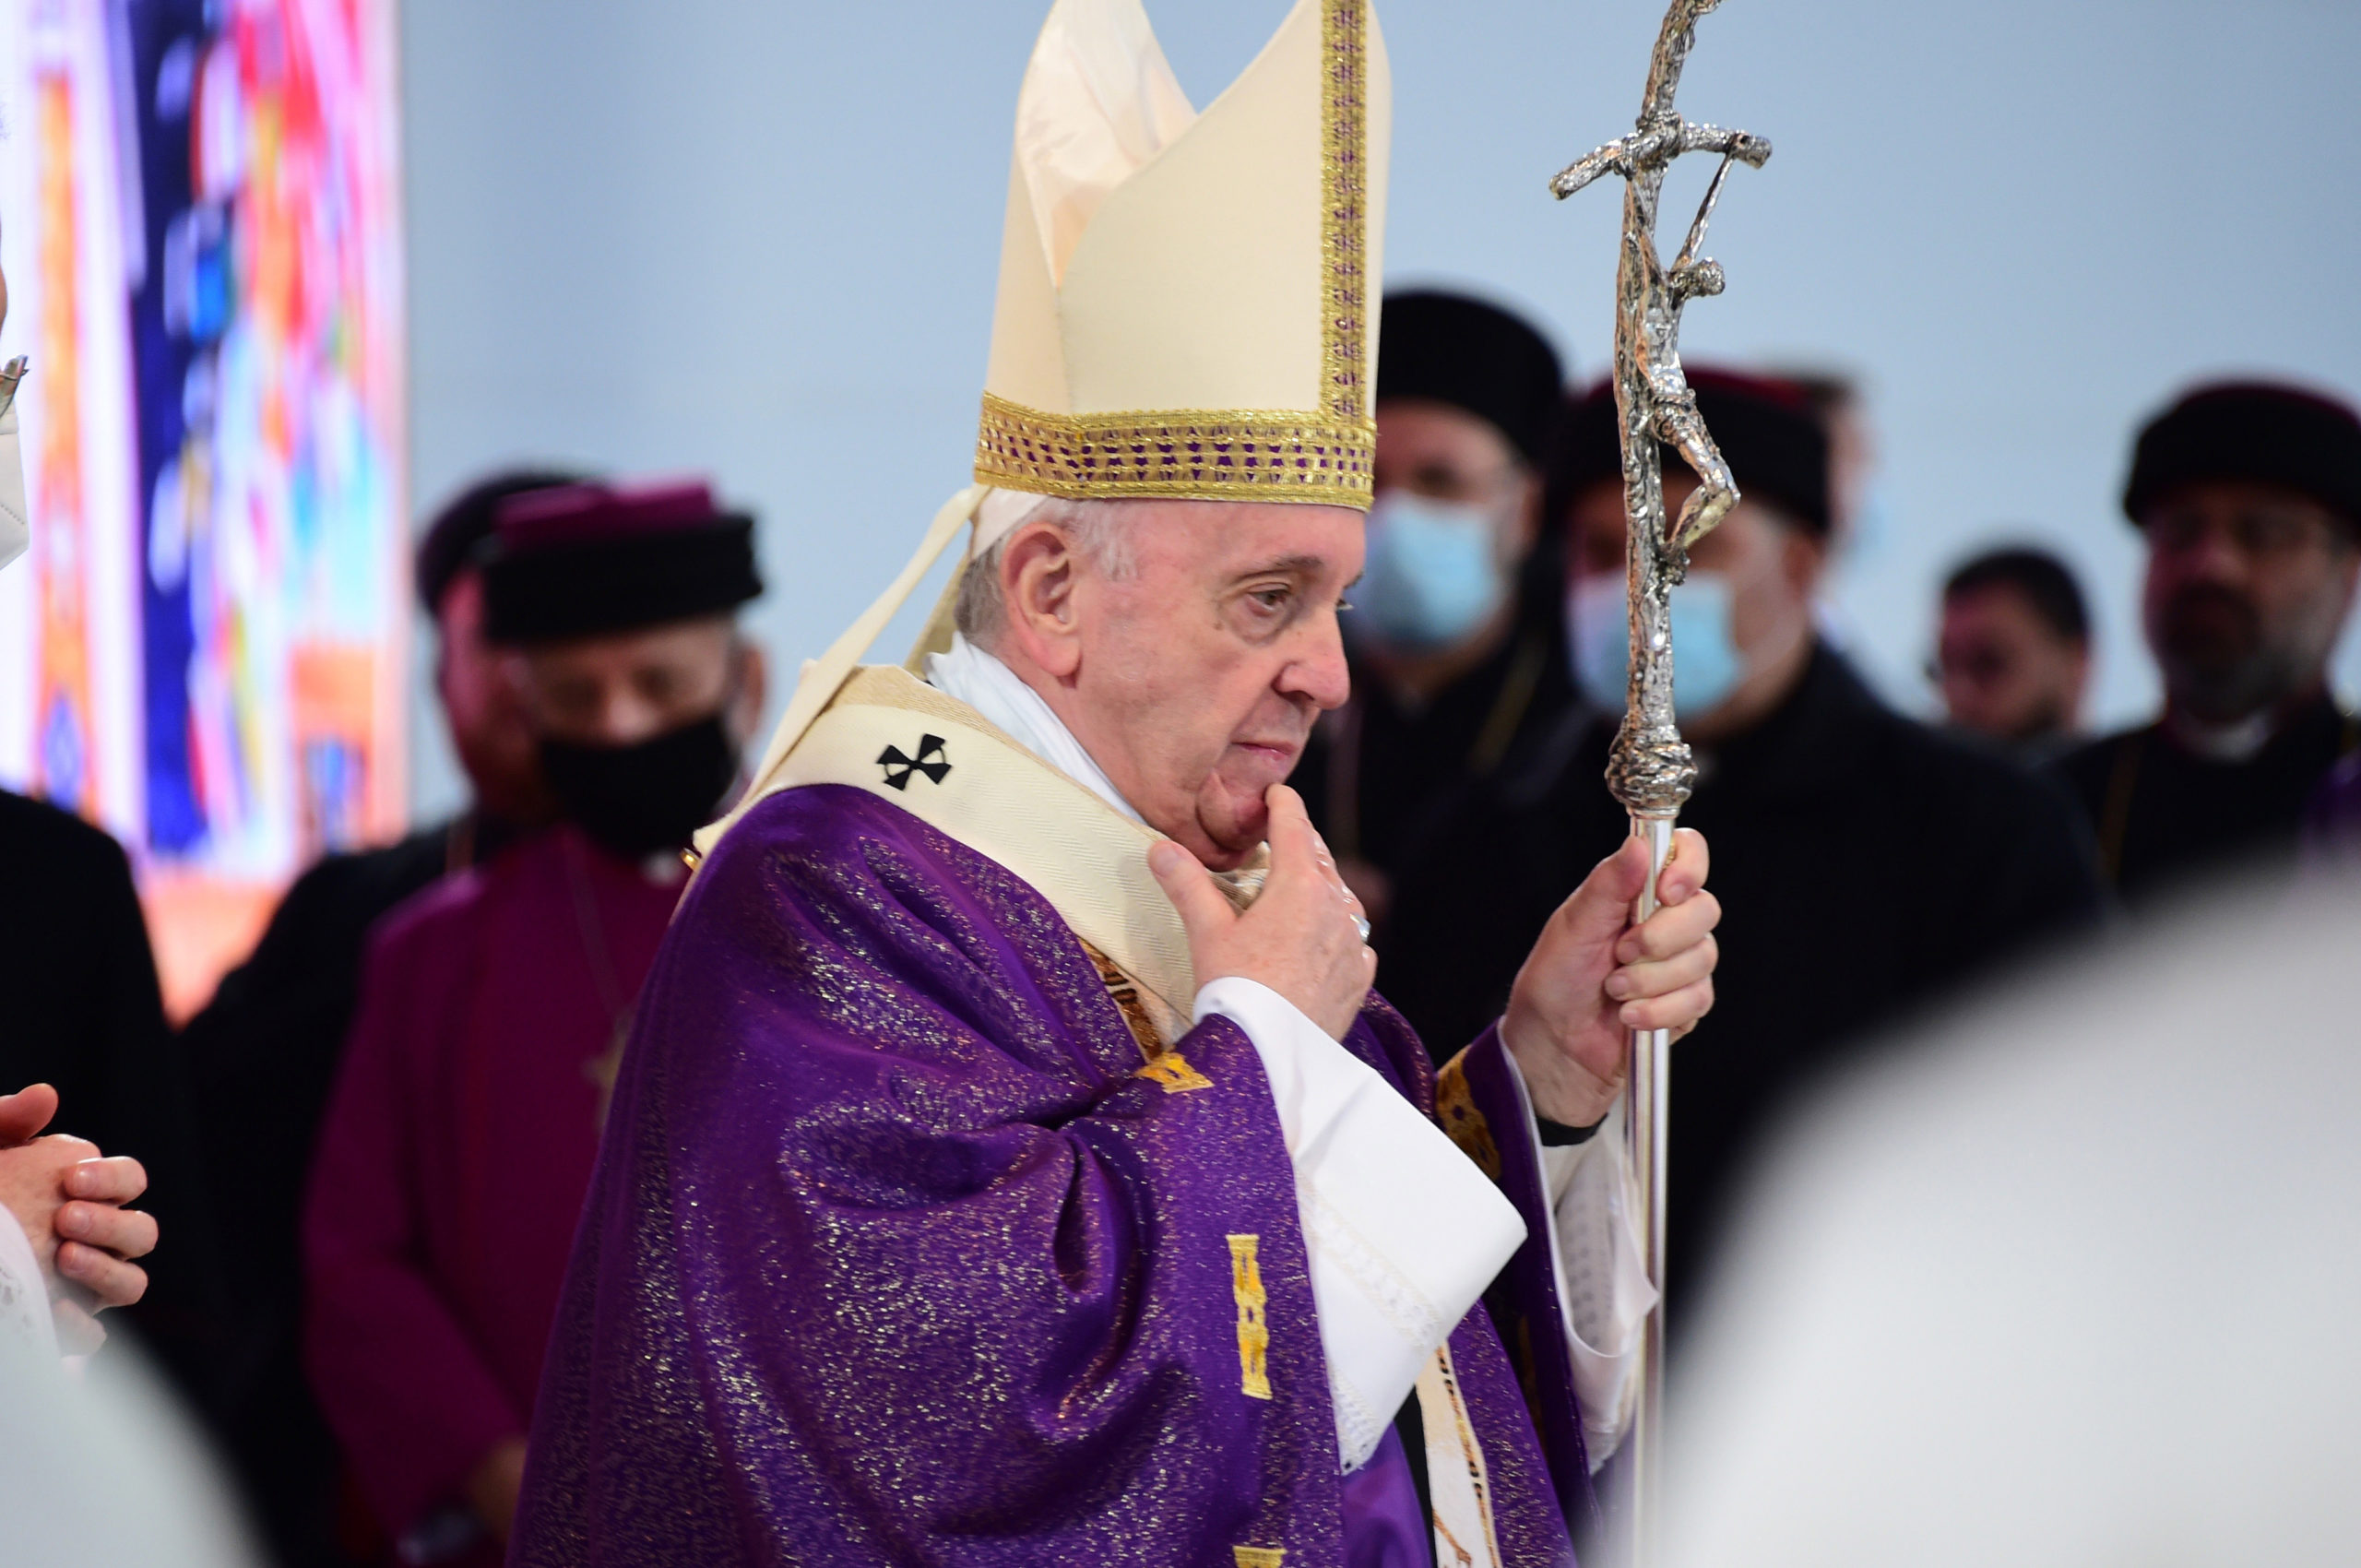 Pope Francis saying Mass in Erbil (© Aid to the Church in Need)